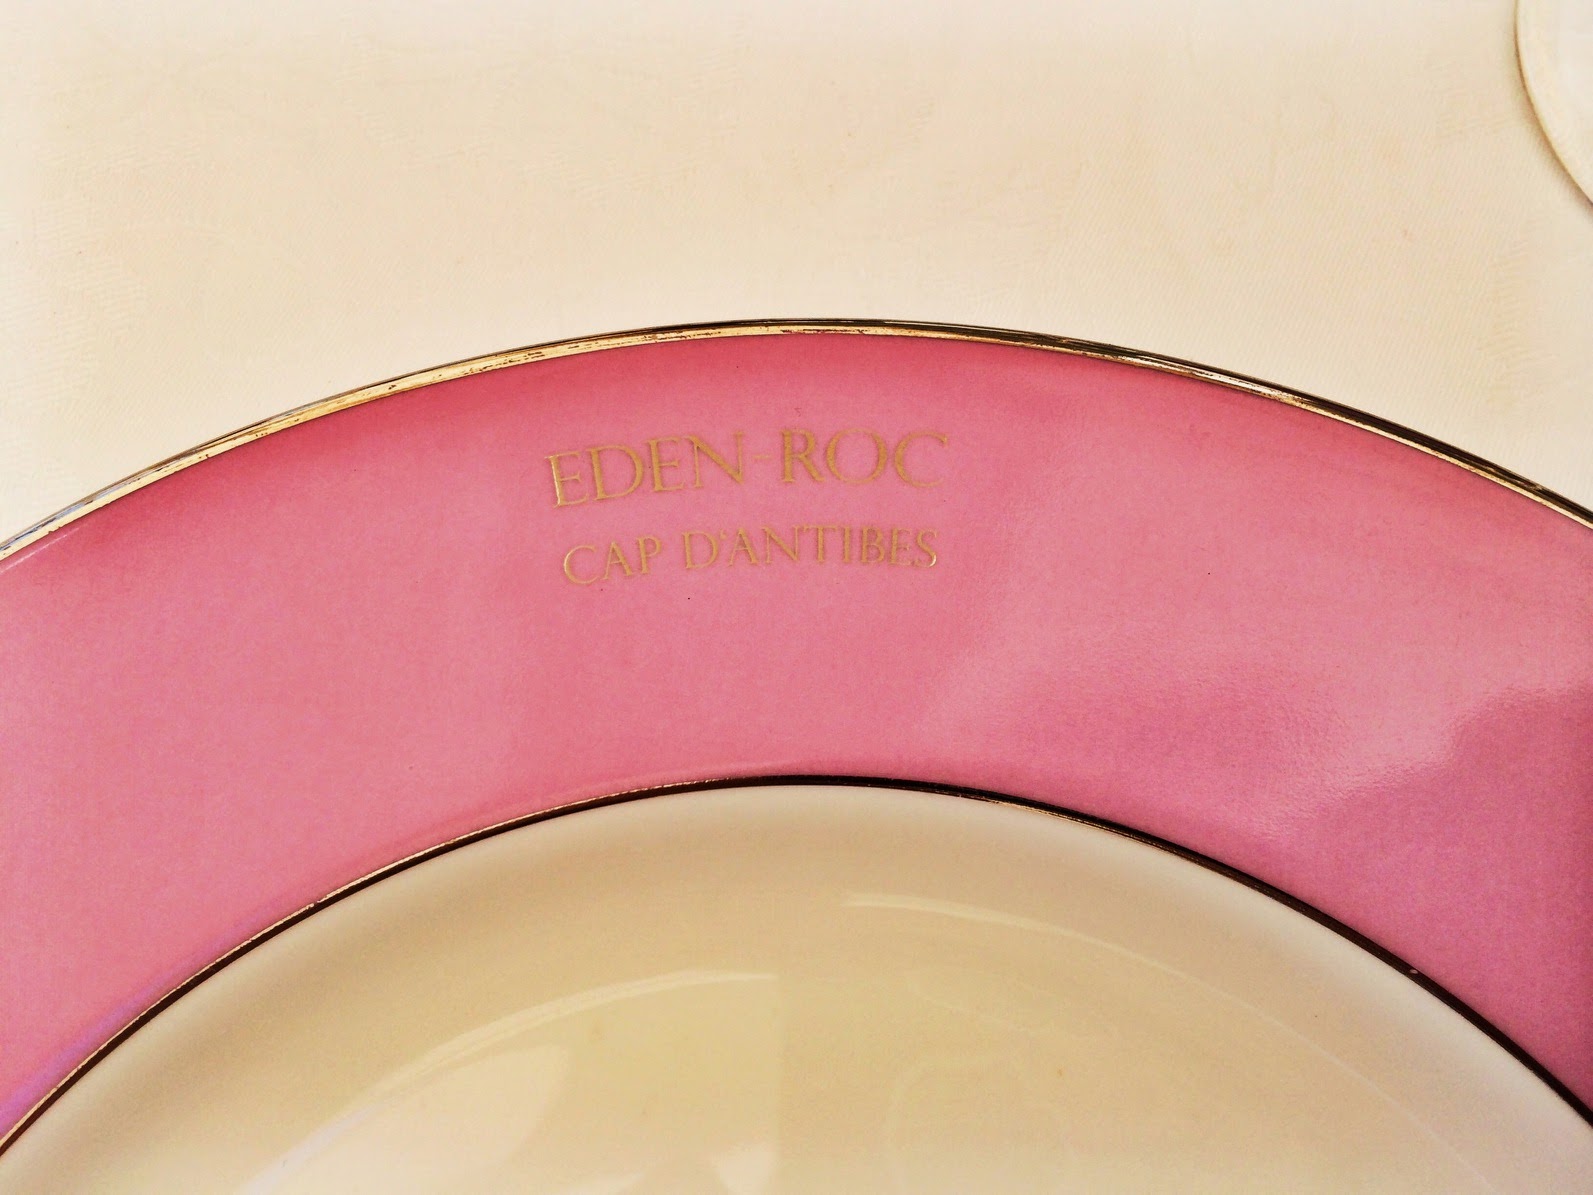 Pink, white and gold china at Hotel du Cap Eden Roc